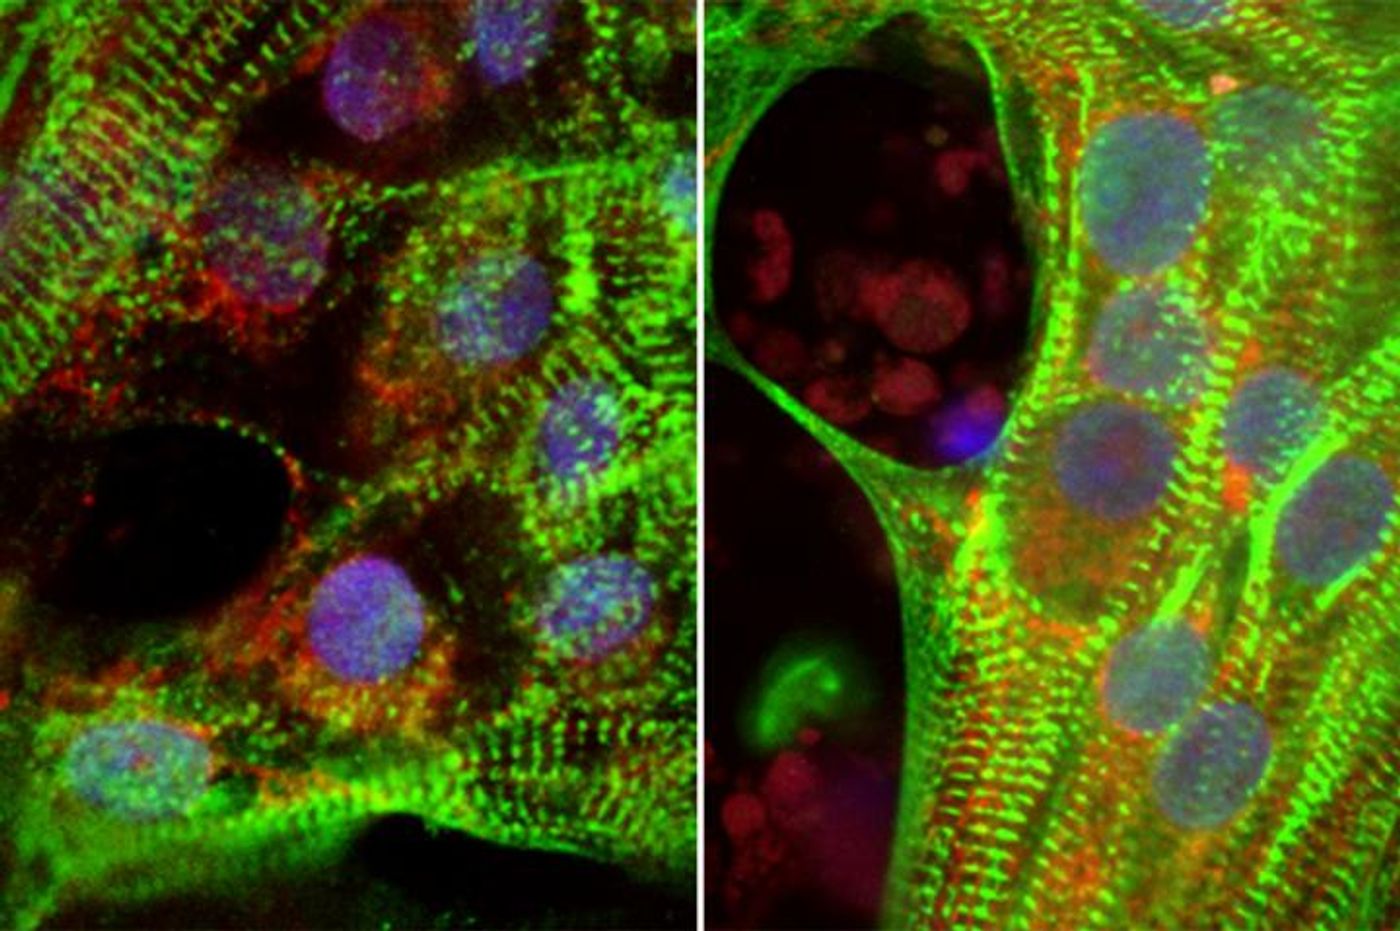 Human heart cells show less robust muscle fibers (green) in high glucose conditions (left) compared to reduced glucose conditions (right).